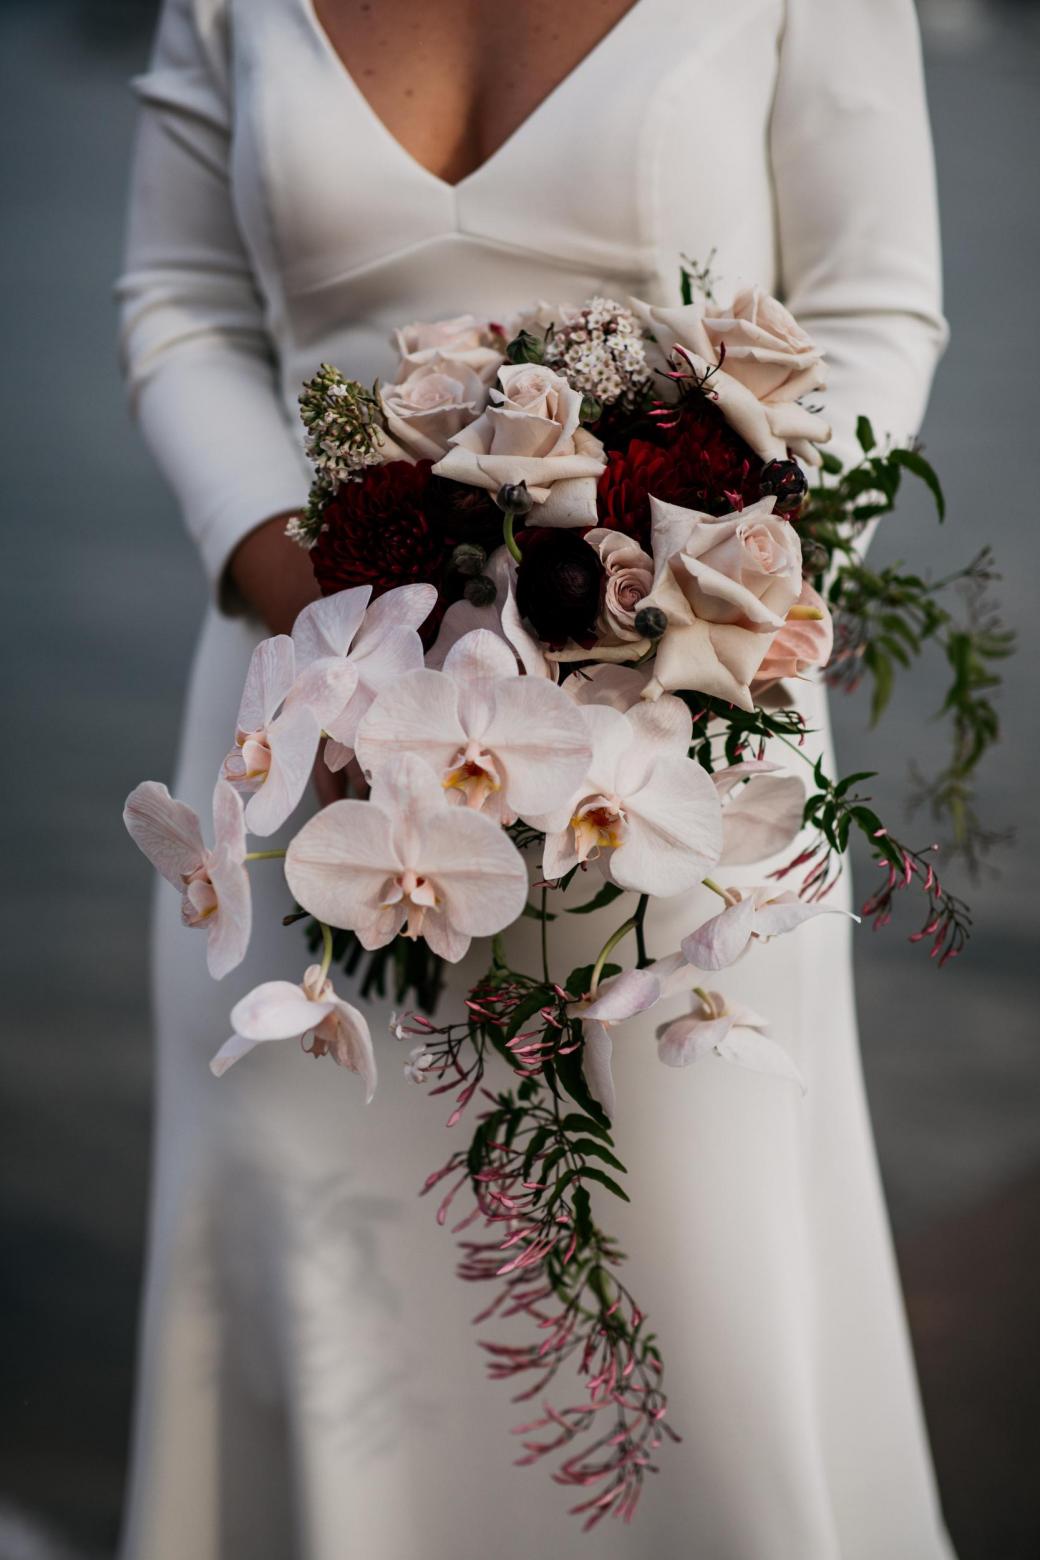 Bride Jordana holds her mixed bridal bouquet, featuring orchids and pink roses; whilst wearing the AUBREY wedding dress by Karen Willis Holmes.